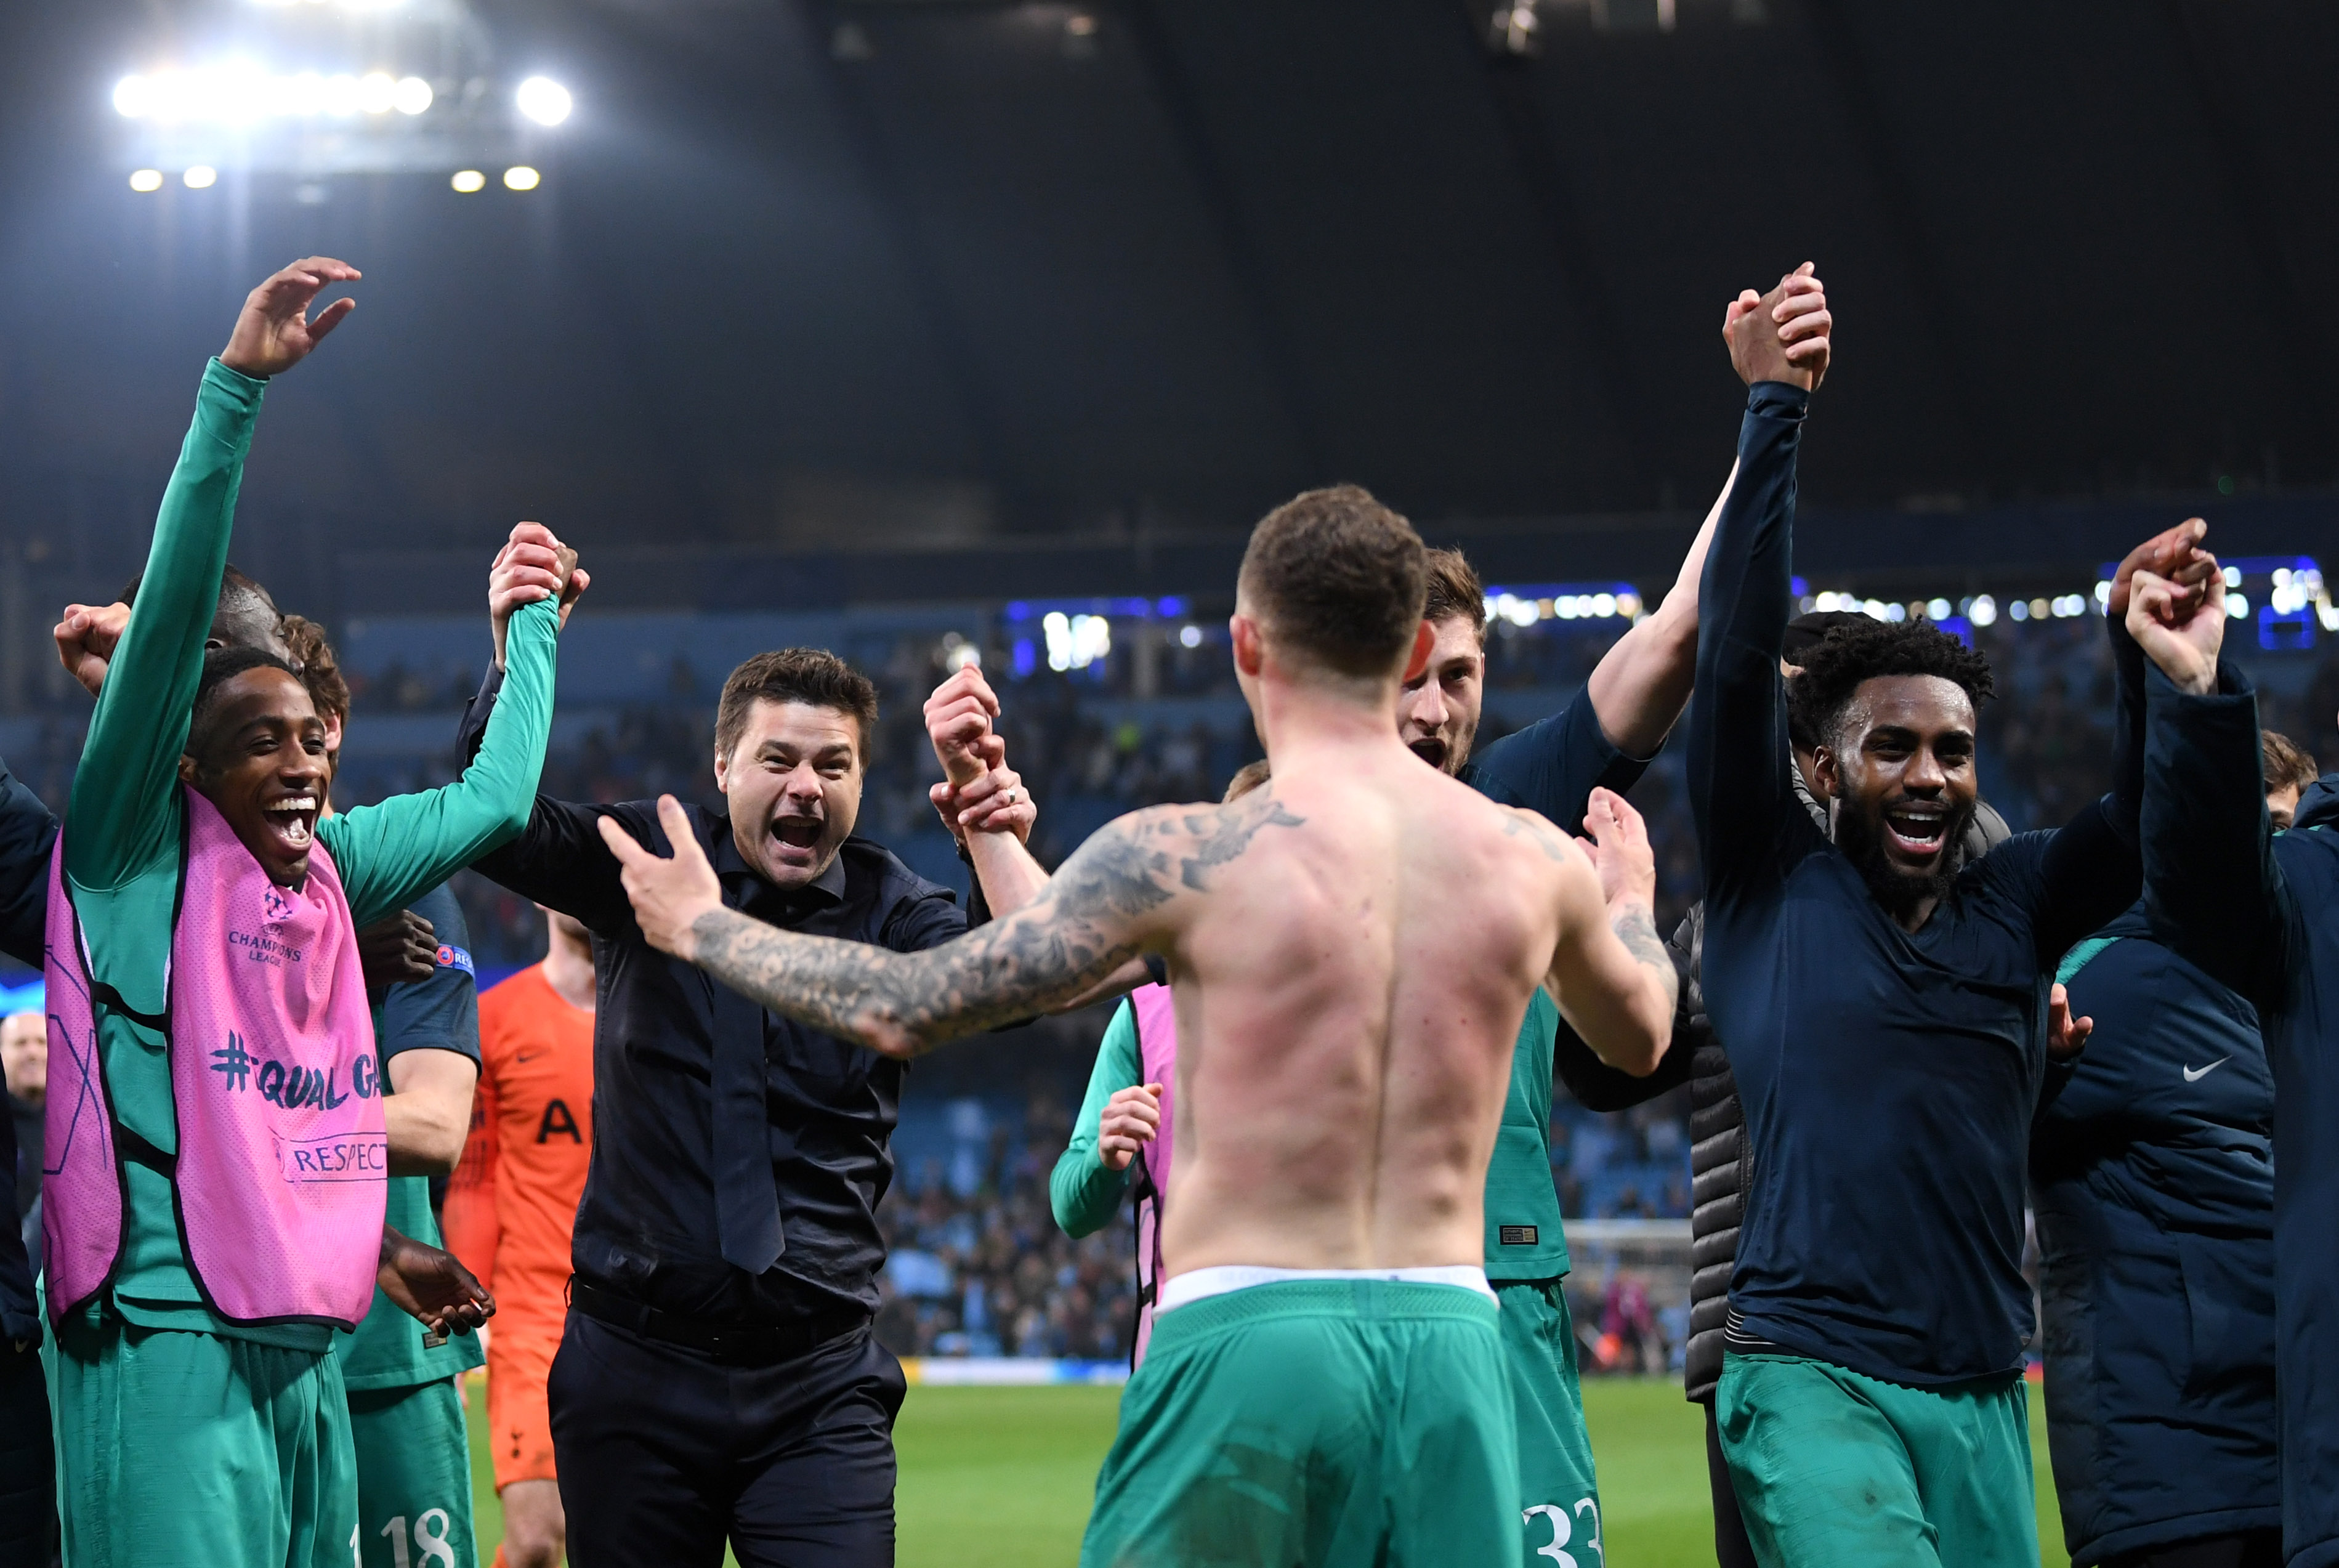 Celebration for Spurs in dramatic scenes at the end of the game